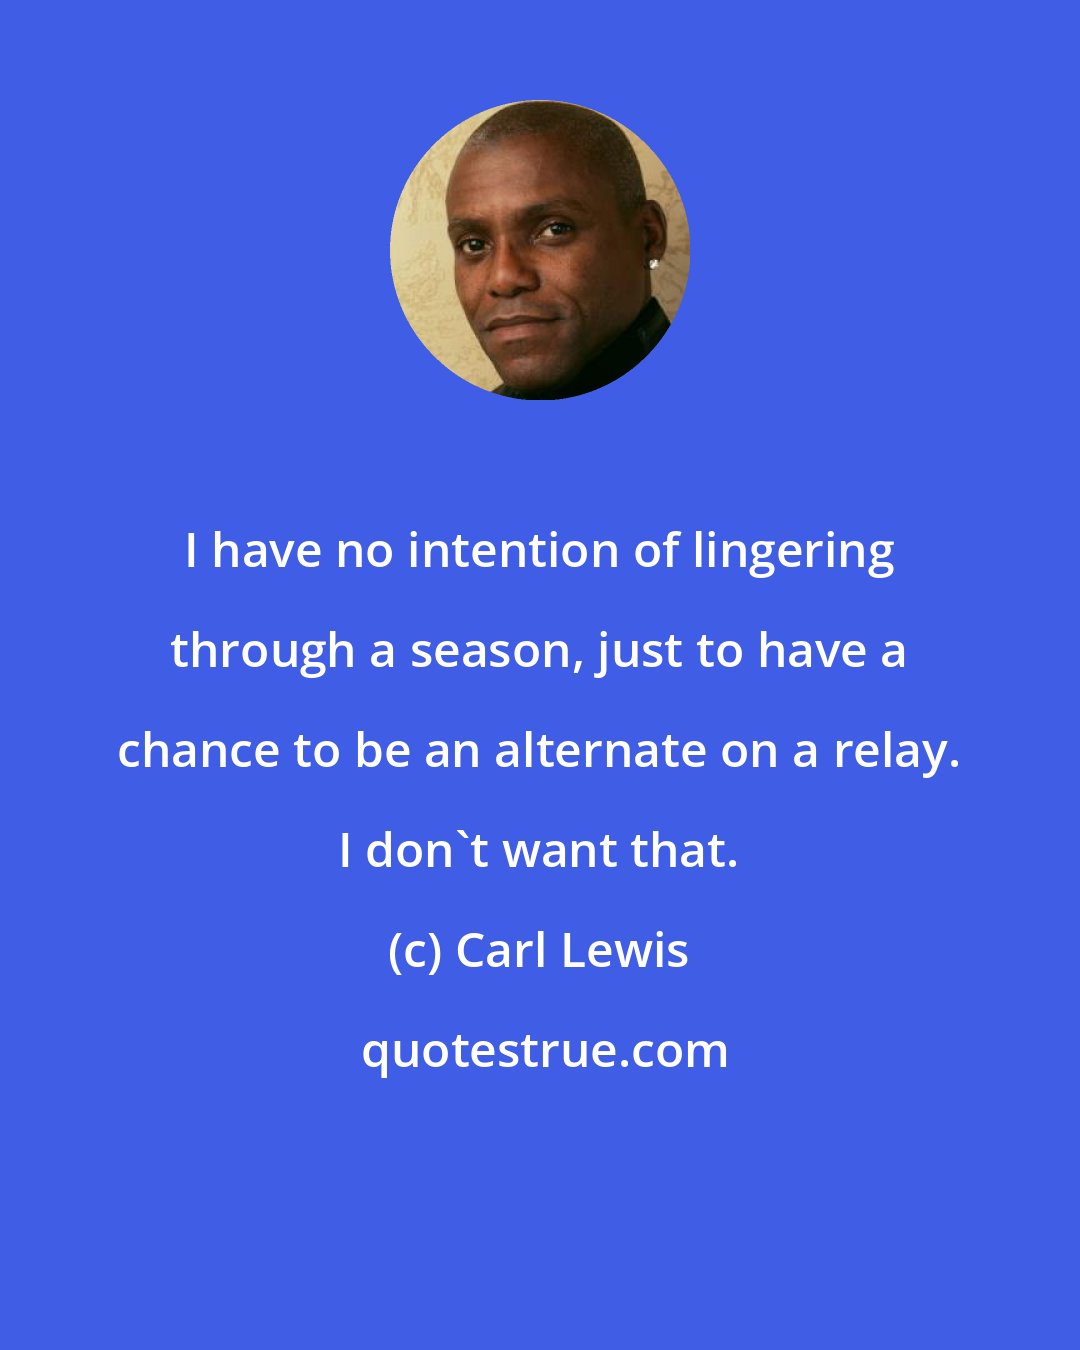 Carl Lewis: I have no intention of lingering through a season, just to have a chance to be an alternate on a relay. I don't want that.